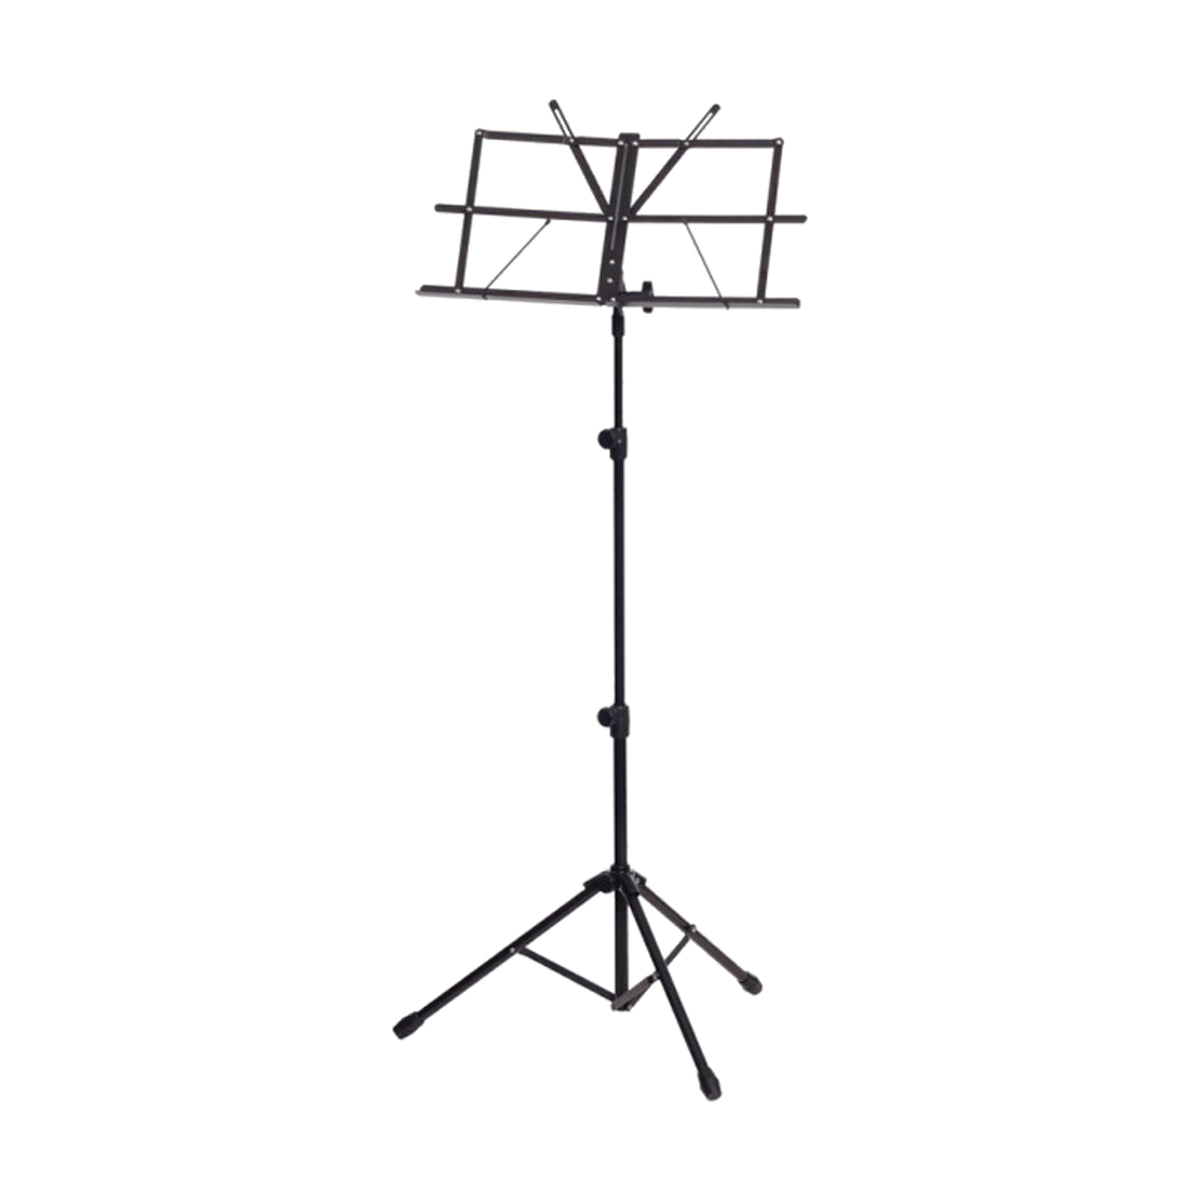 Xtreme MS75 Fold Up Music Stand